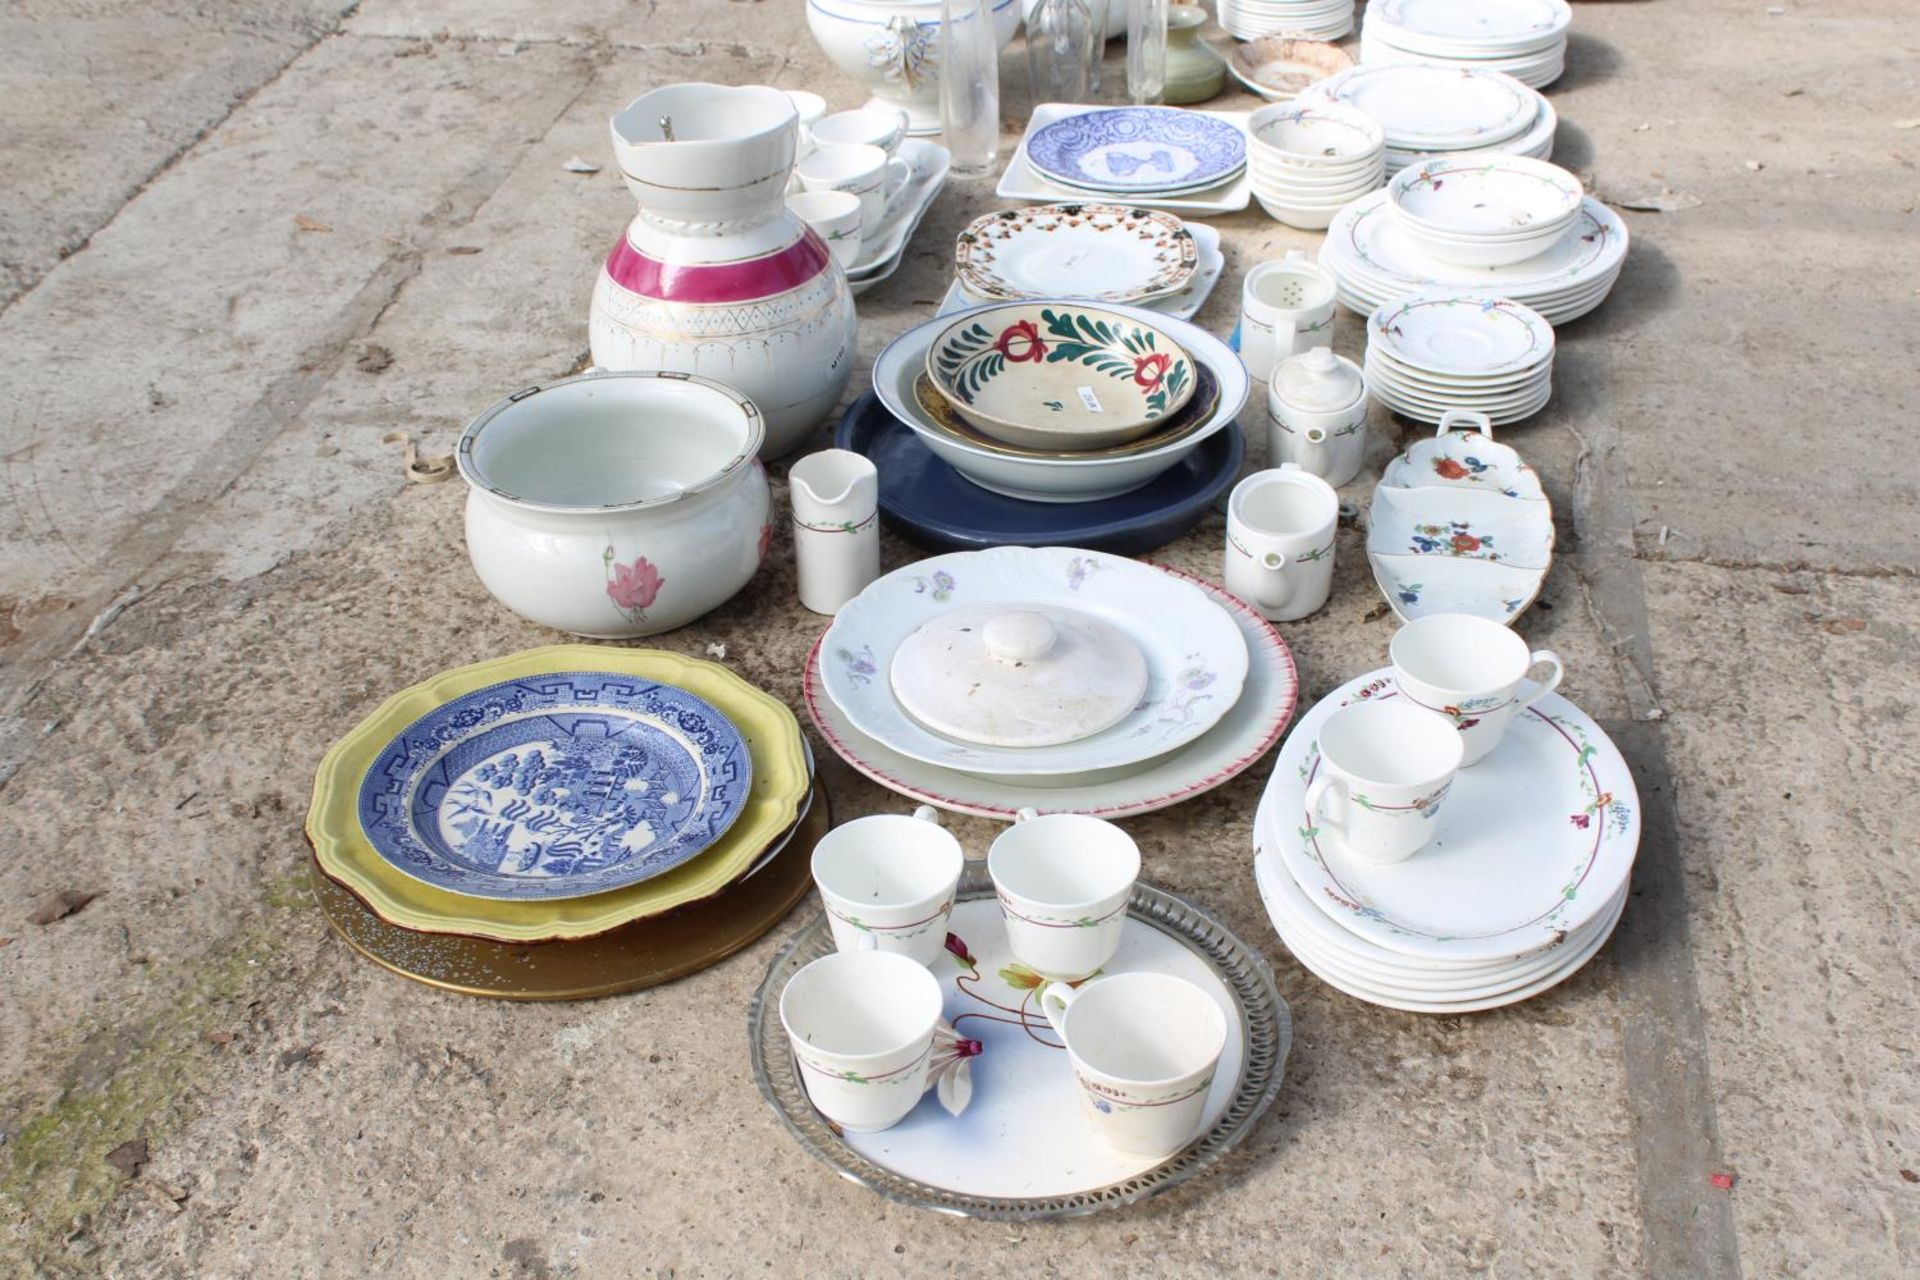 A LARGE ASSORTMENT OF CERAMICS AND GLASS WARE TO INCLUDE PLATES, BOWLS AND A JUG ETC - Image 4 of 4